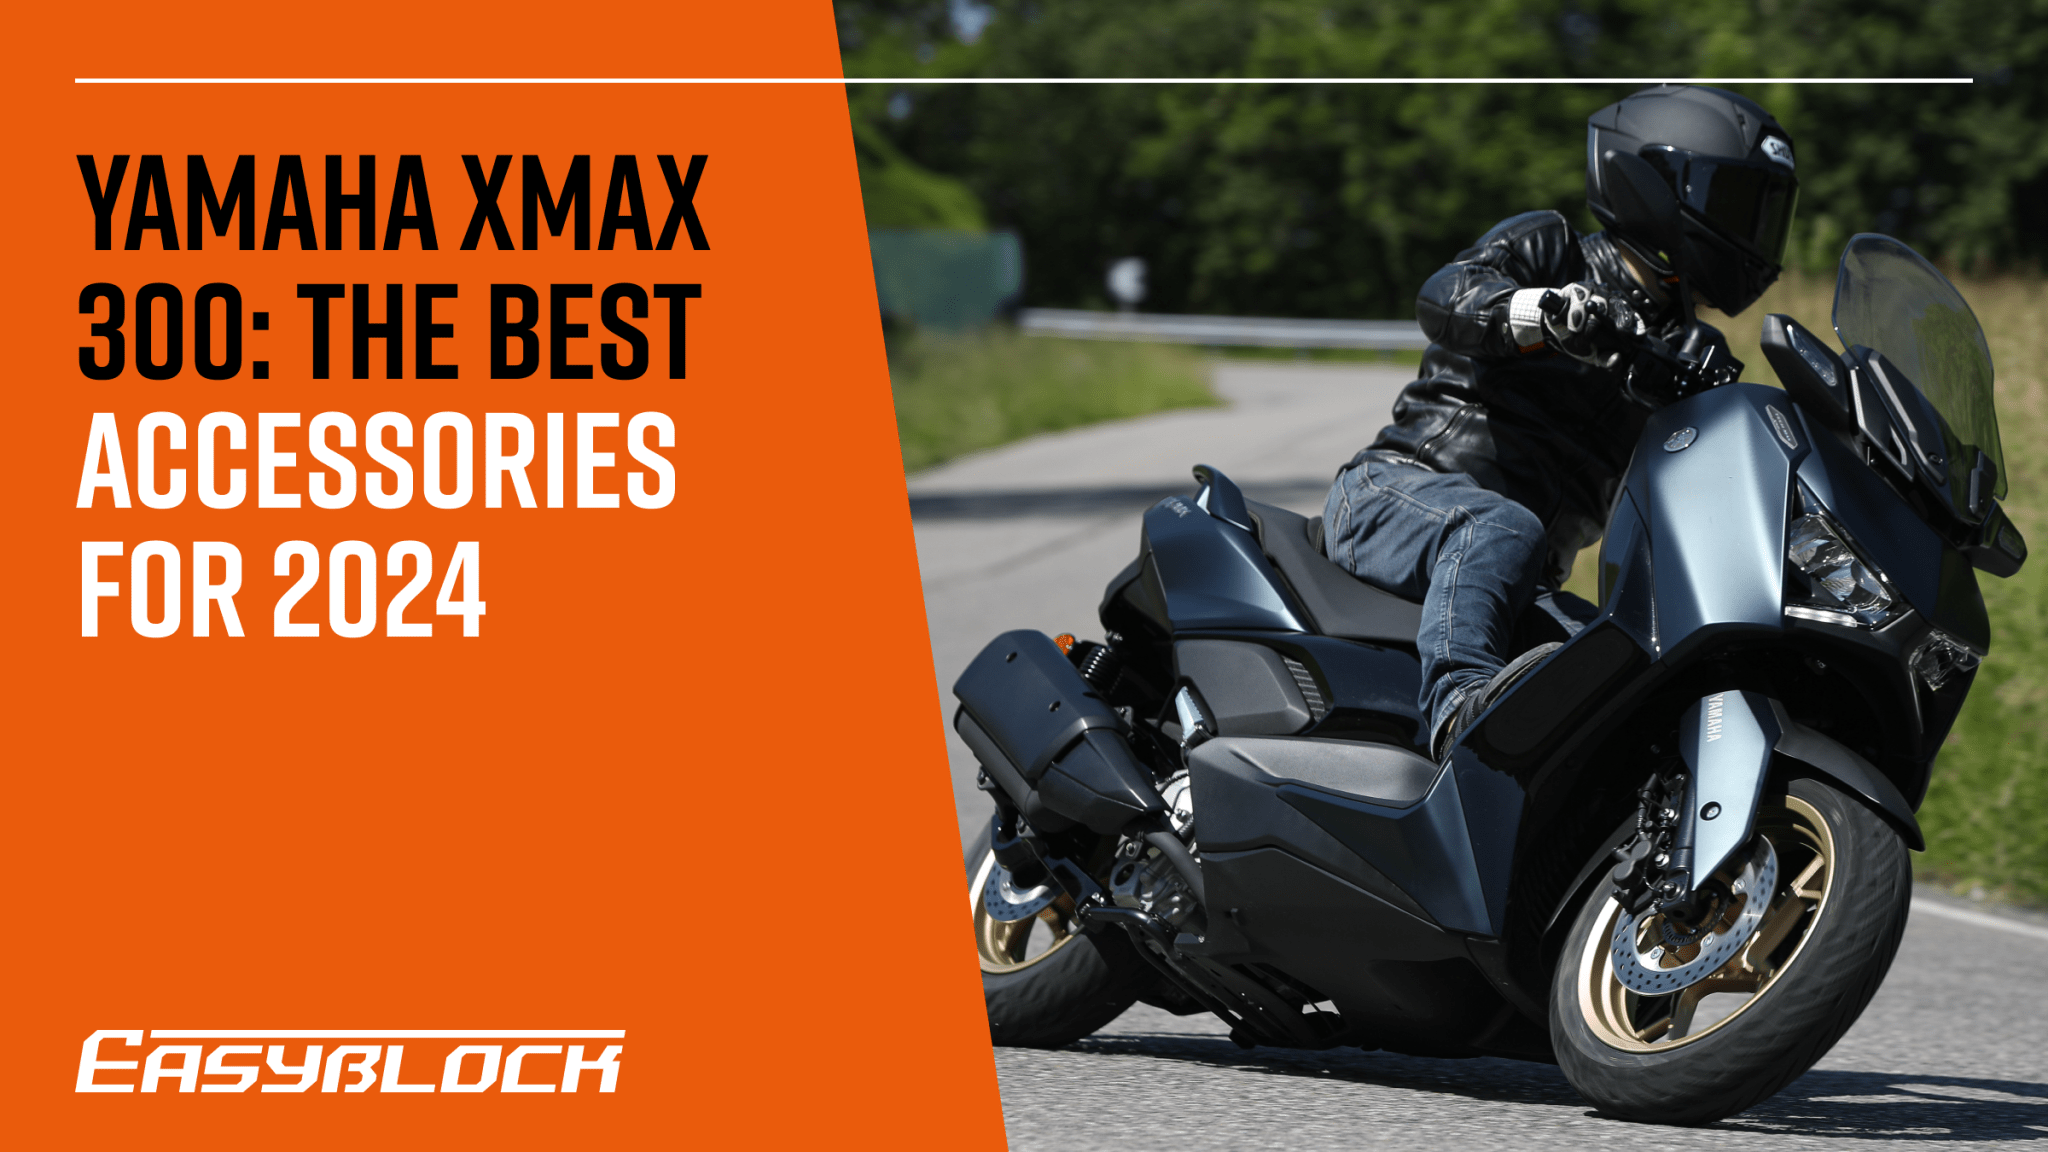 Yamaha XMAX 300: Top 10 Accessories for 2024 – EasyBlock